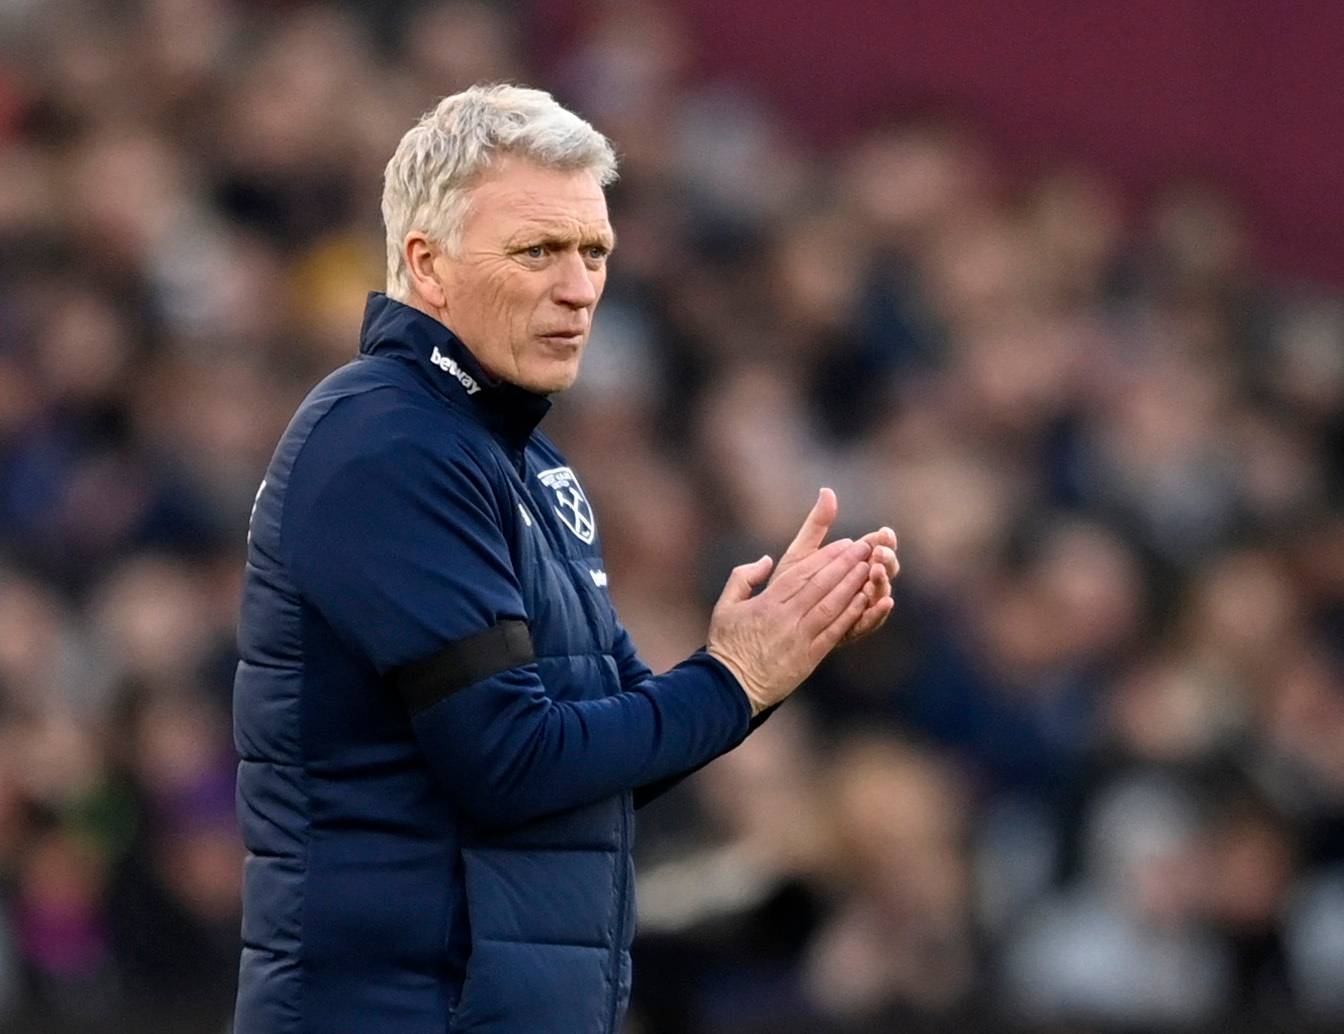 West Ham: Hammers want to sign a centre-back in January - Follow up